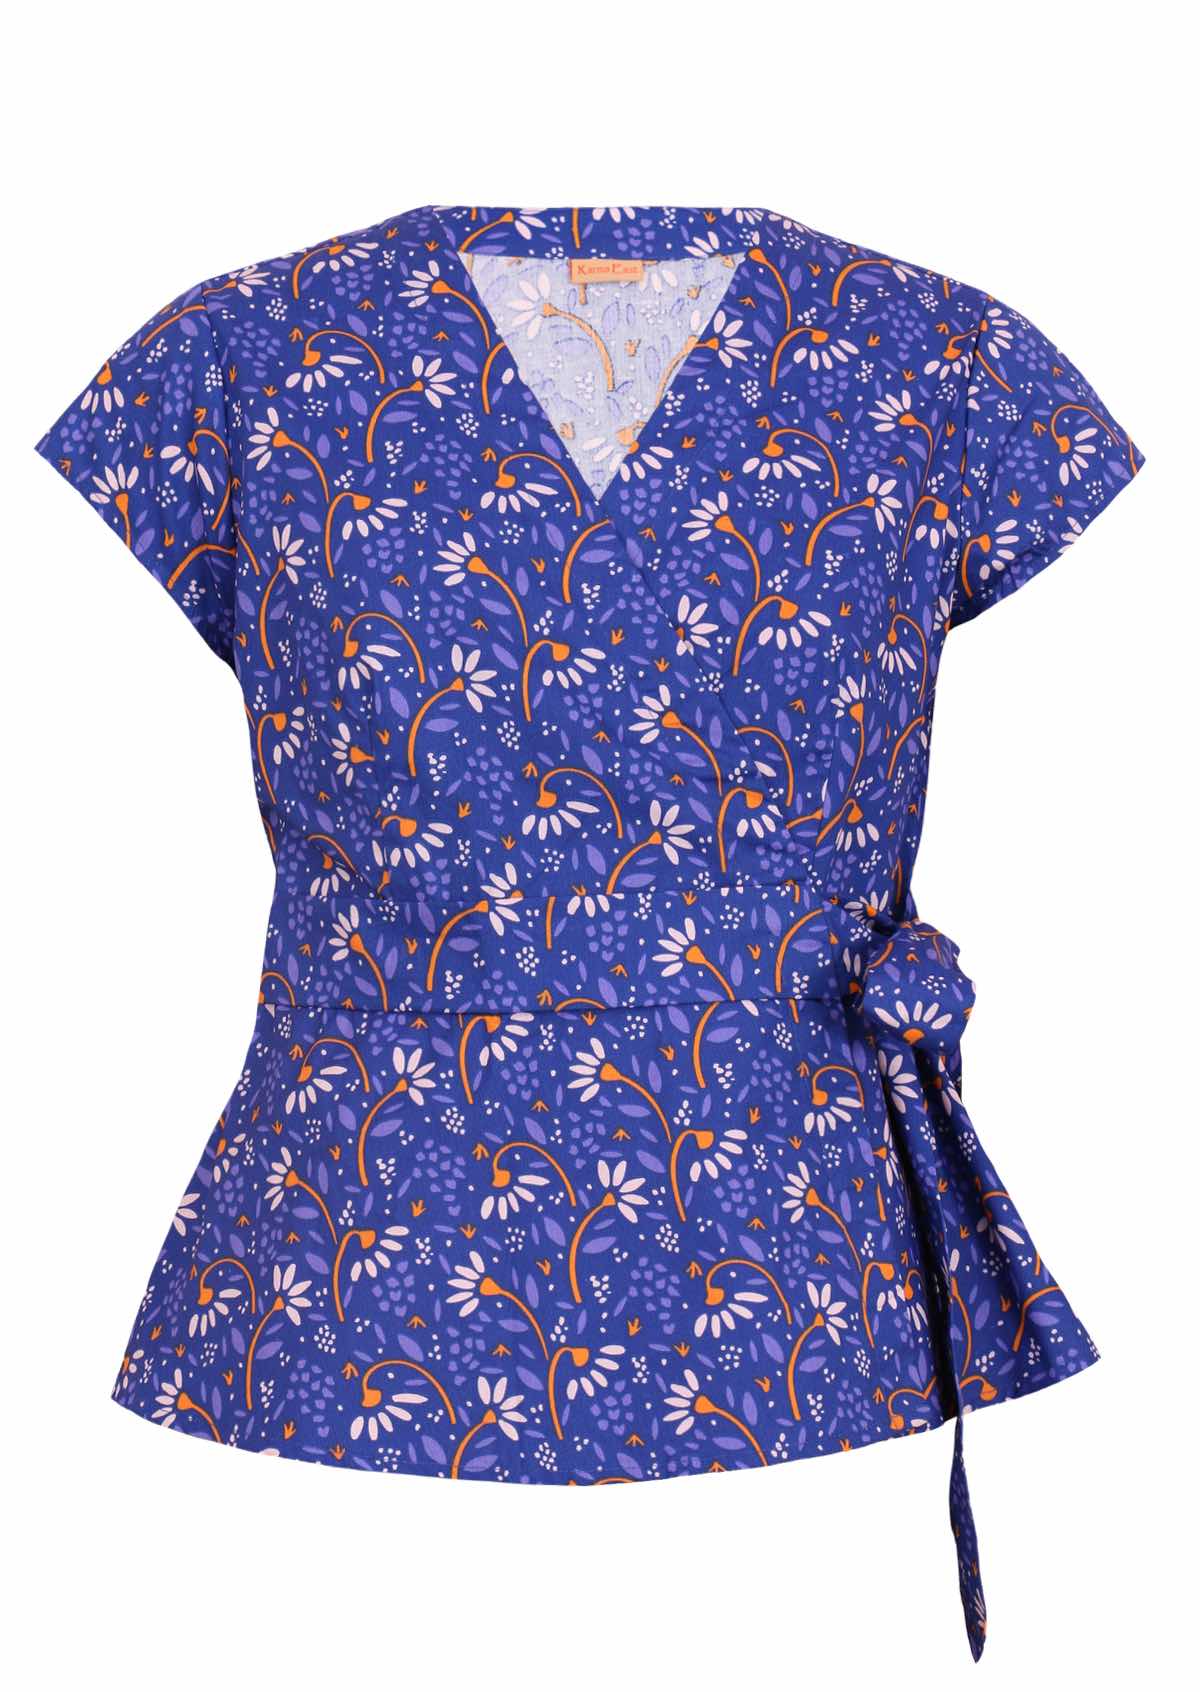 Cotton wrap top with orange and white flowers on bright blue base